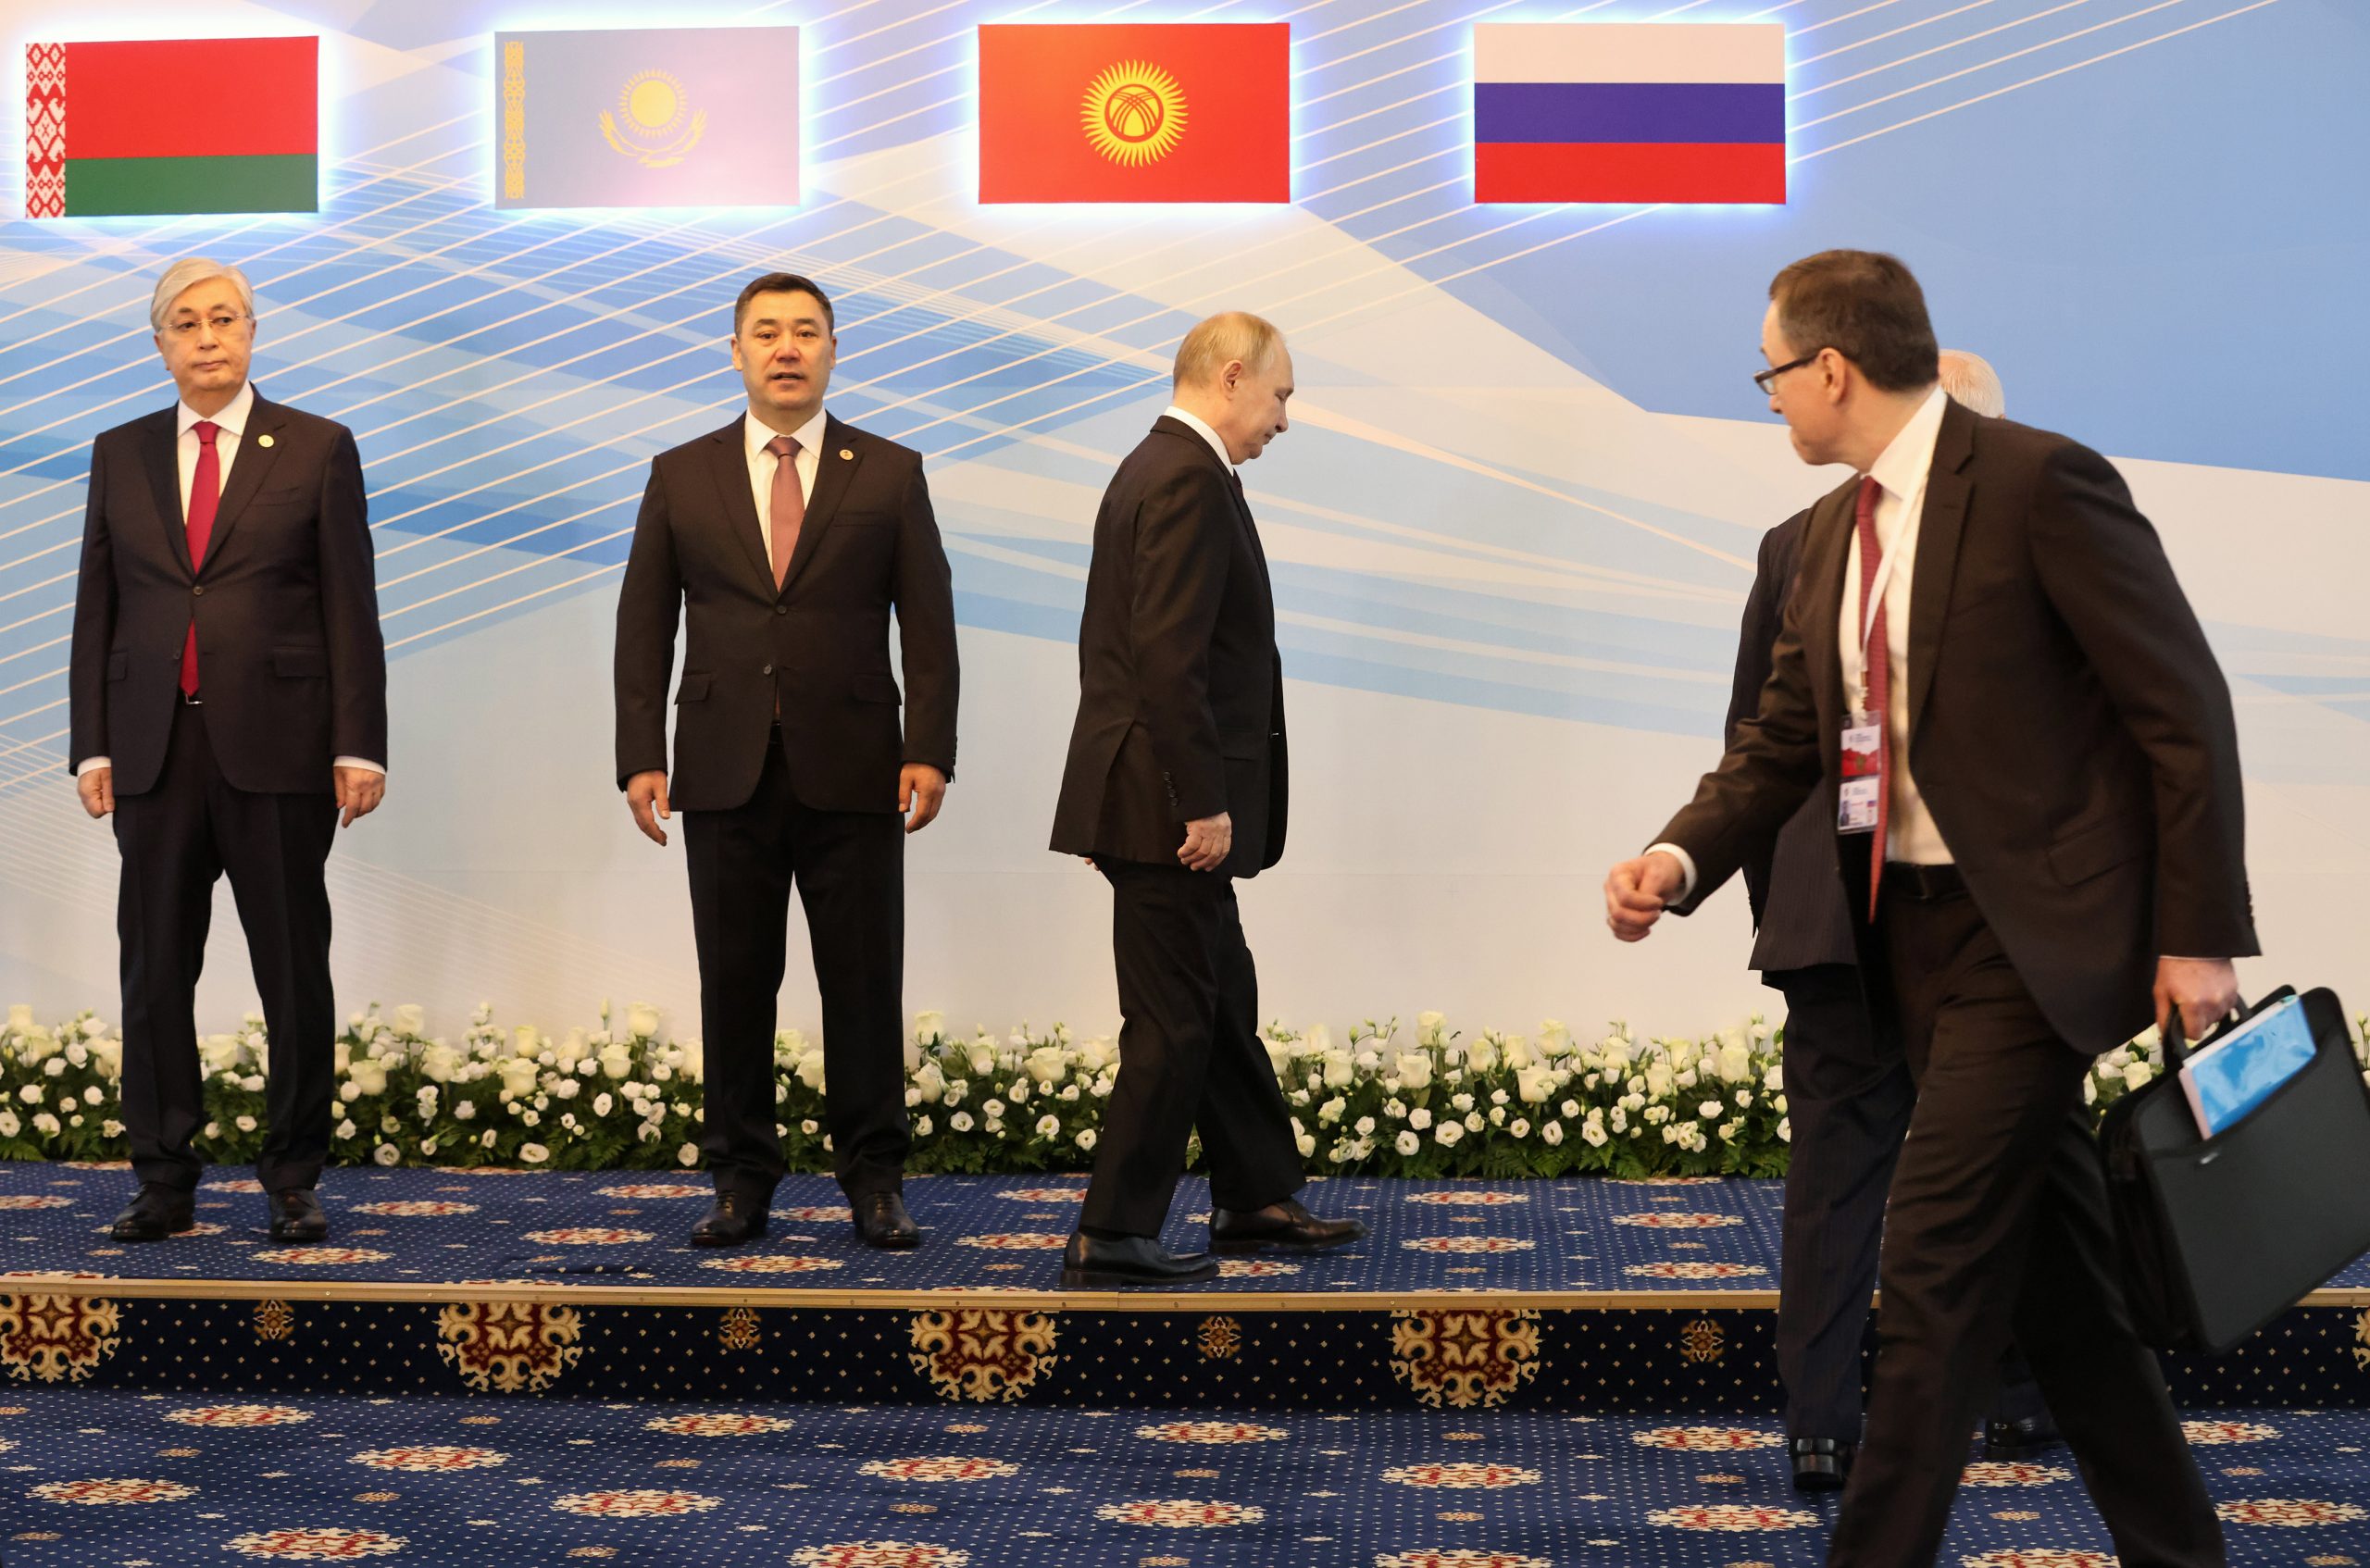 Central Asian leaders distancing themselves from Putin